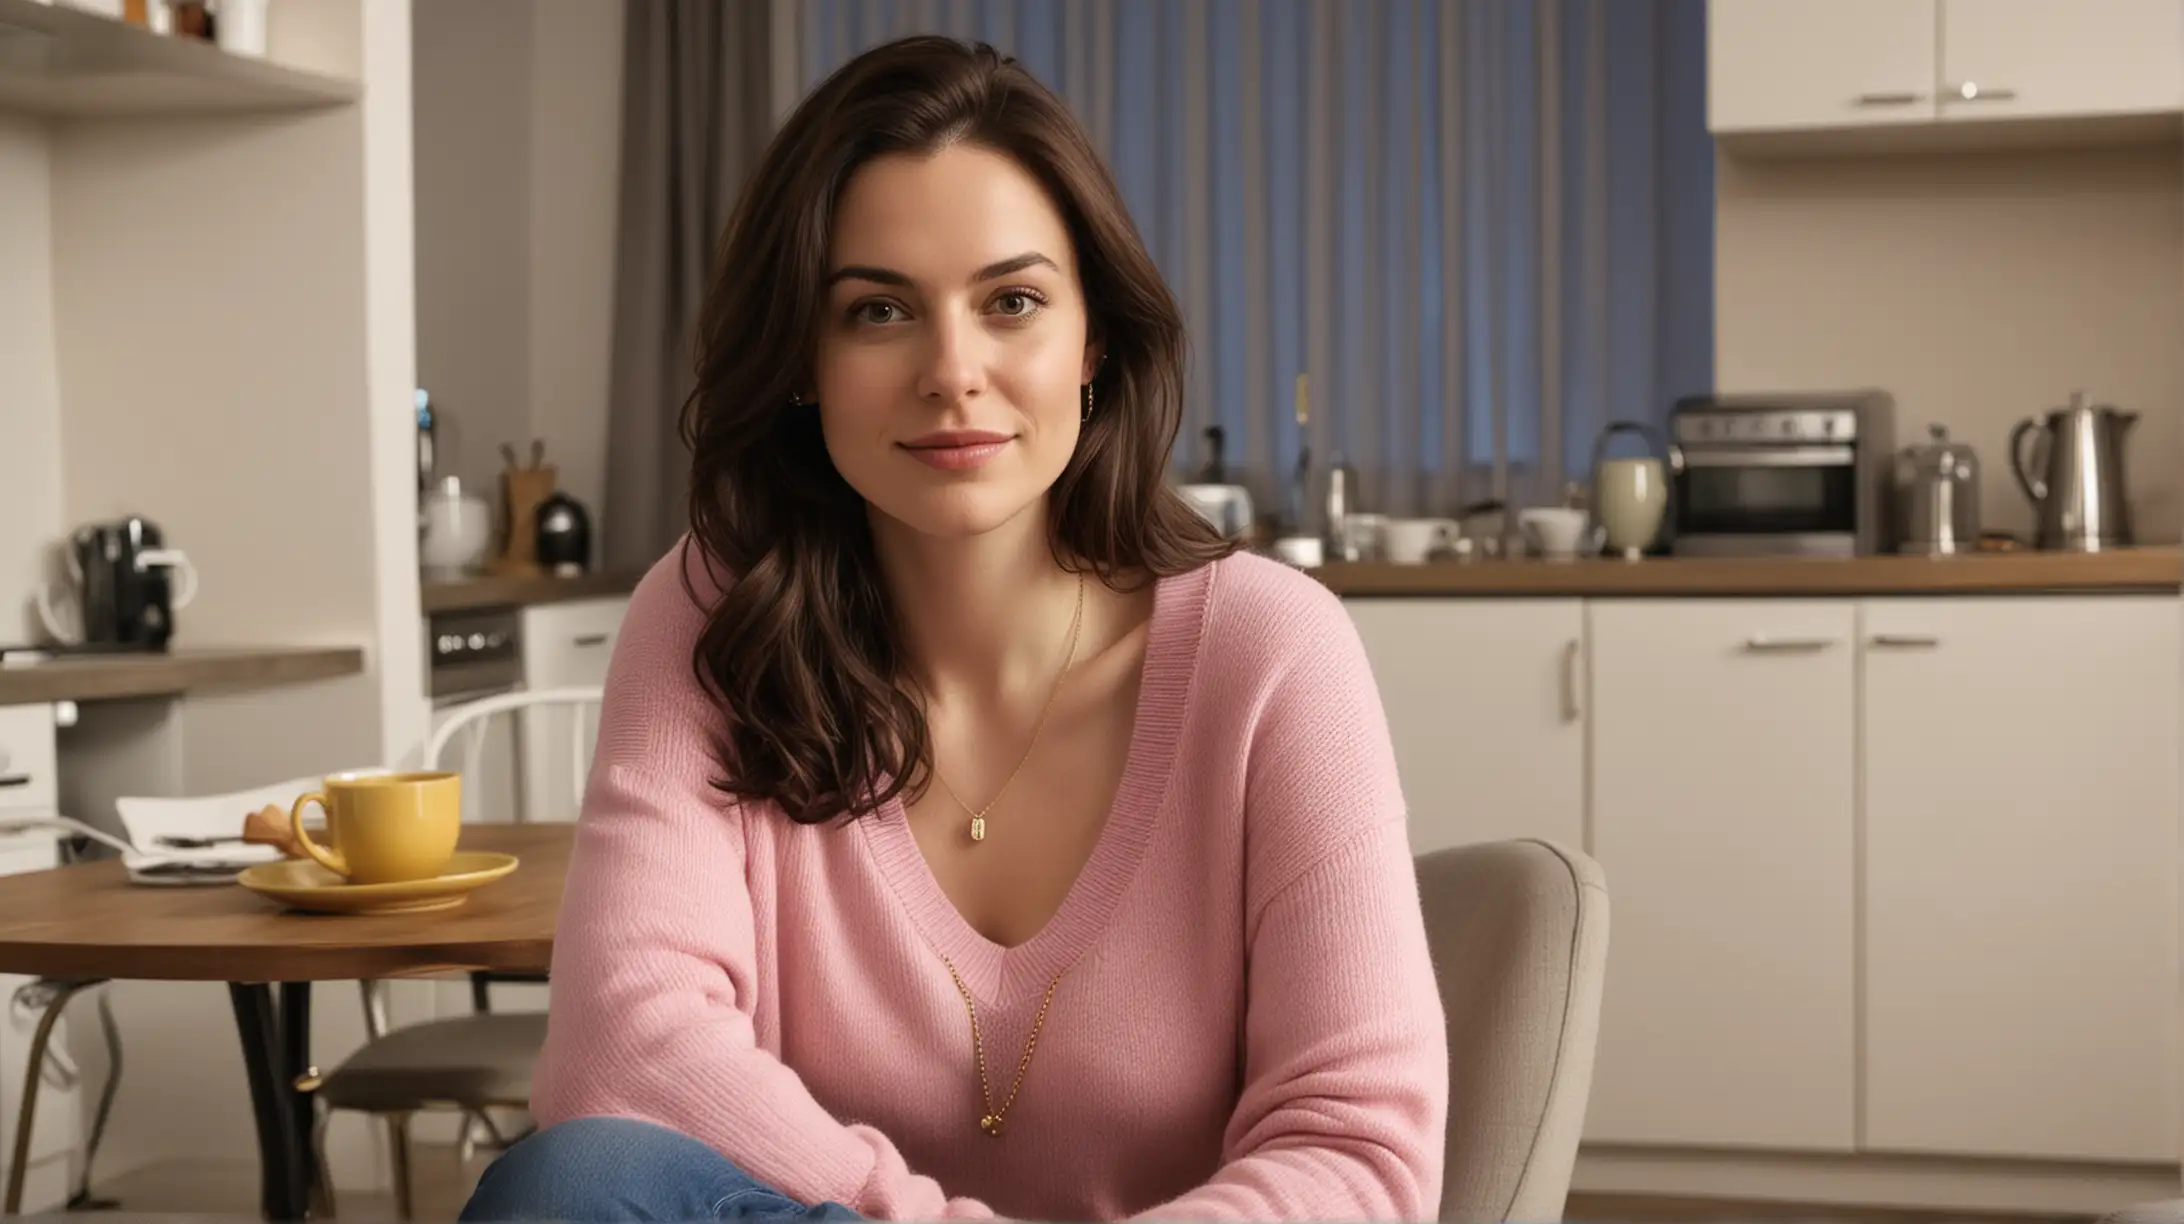 30 year old pale white woman with long dark brown hair, parted to the right, wearing a pink sweater, blue jeans and a gold necklace. She is sitting down in a simple chair at a kitchen table with one cup of tea, modern high rise urban apartment background at night